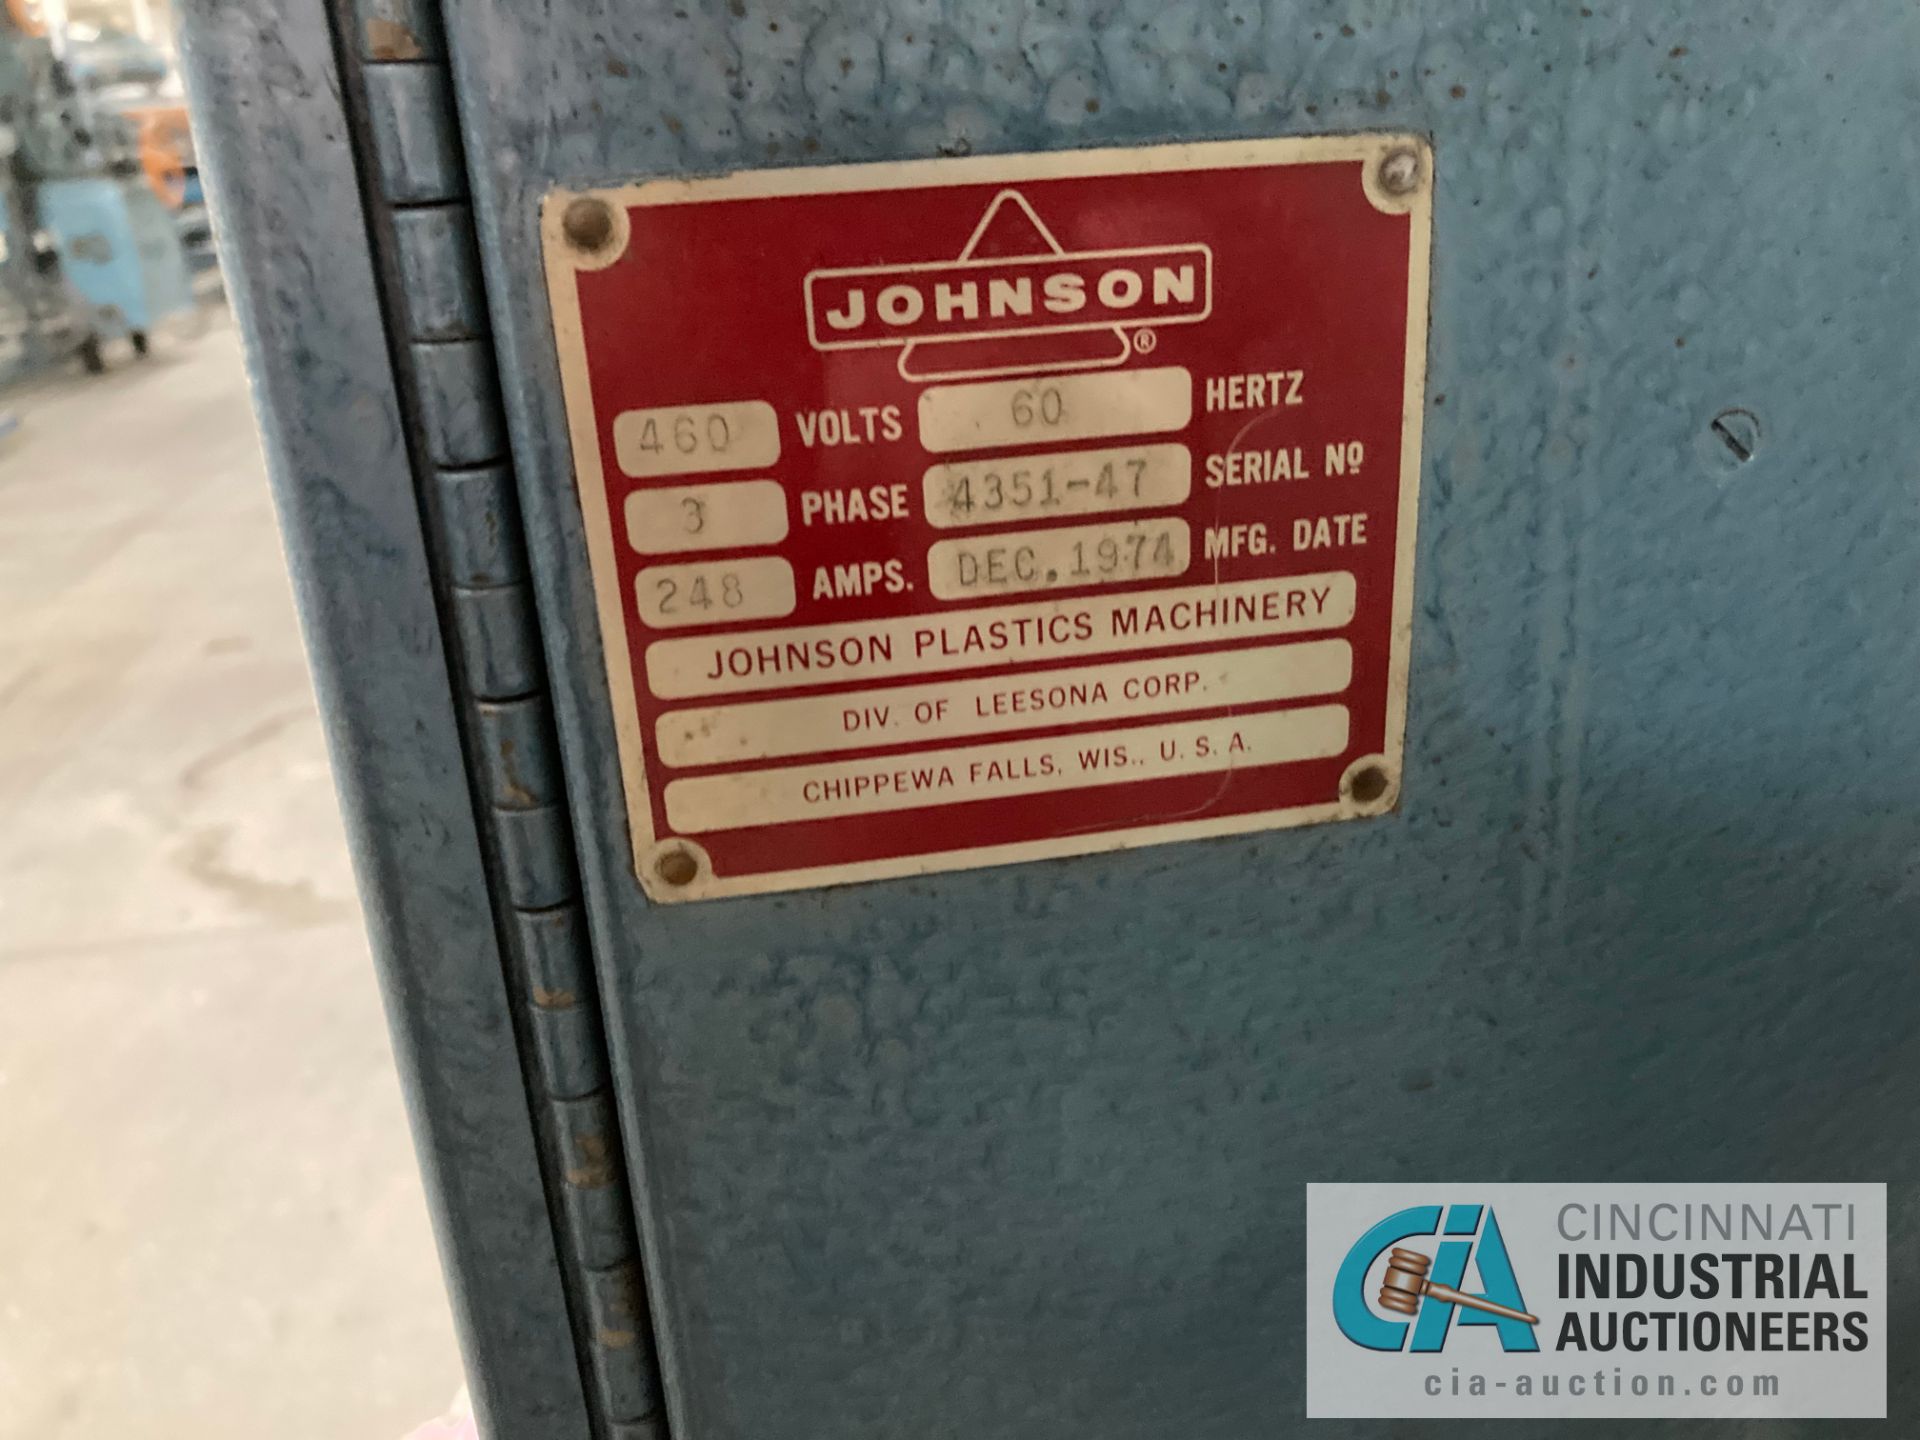 3.5" JOHNSON EXTRUDER; S/N 4353-47, 24.1 L/D VENTED BARREL, 17.1 GEARBOX RATIO, 126 HP MOTOR,1750 - Image 7 of 10